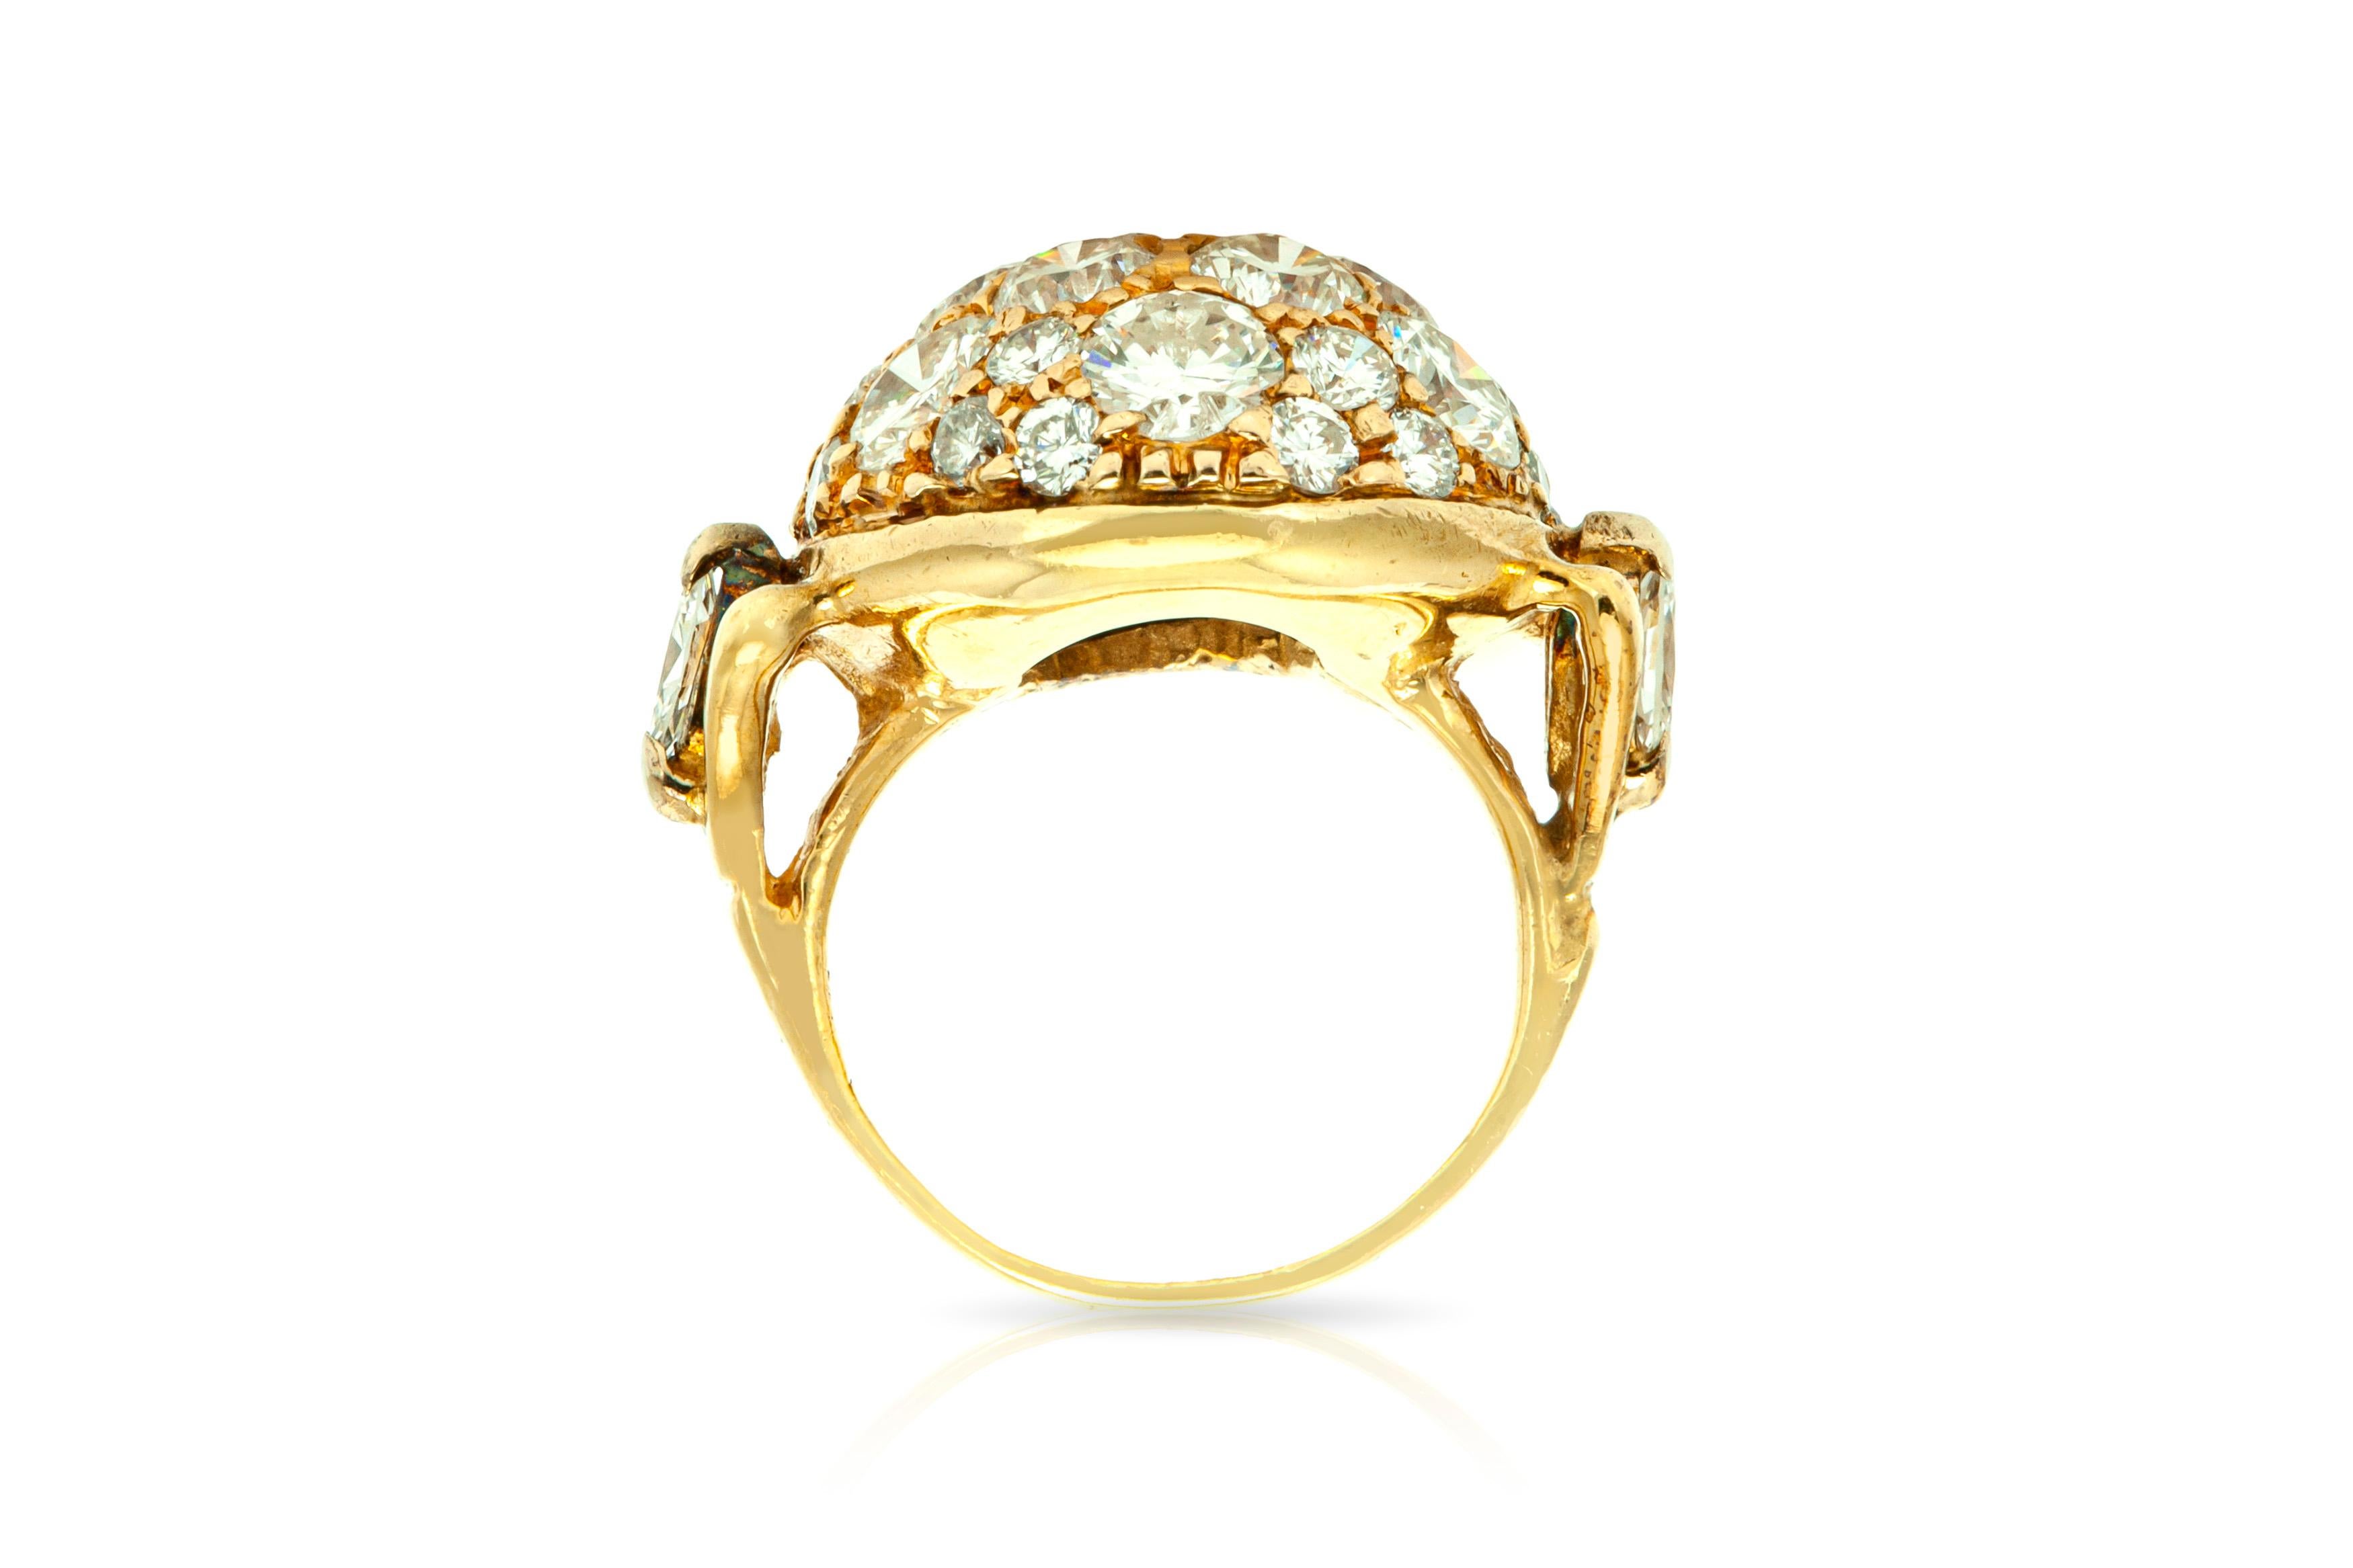 The ring is finely crafted in 14h yellow gold with diamonds on the top of the ring weighing approximately total of 4.00 carat.

